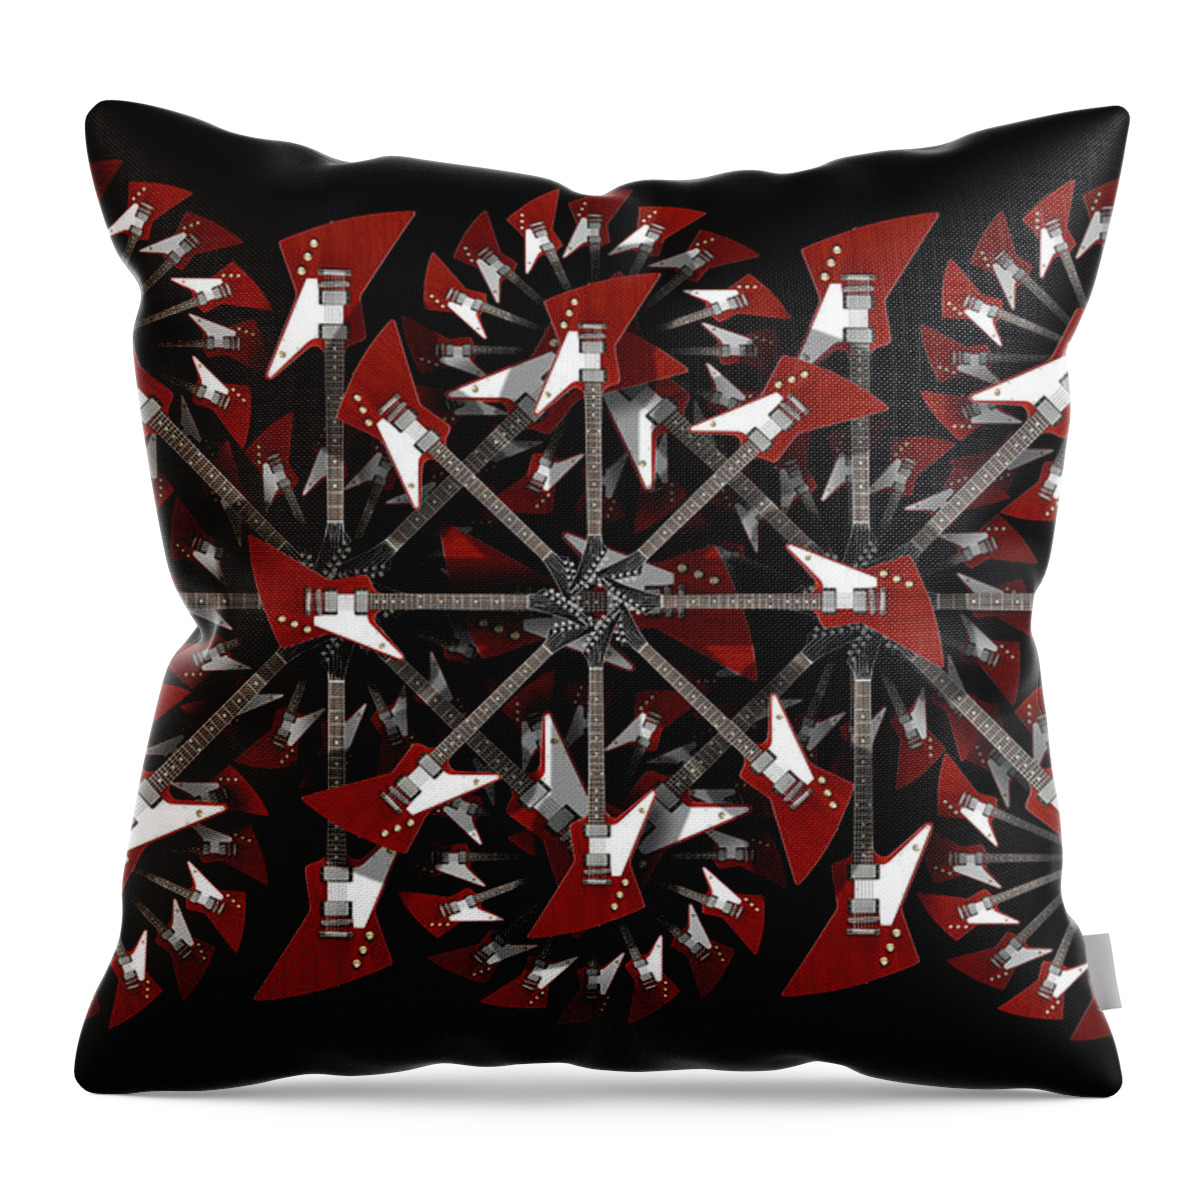 Abstract Guitars Throw Pillow featuring the photograph Classic Guitars Abstract 23 by Mike McGlothlen